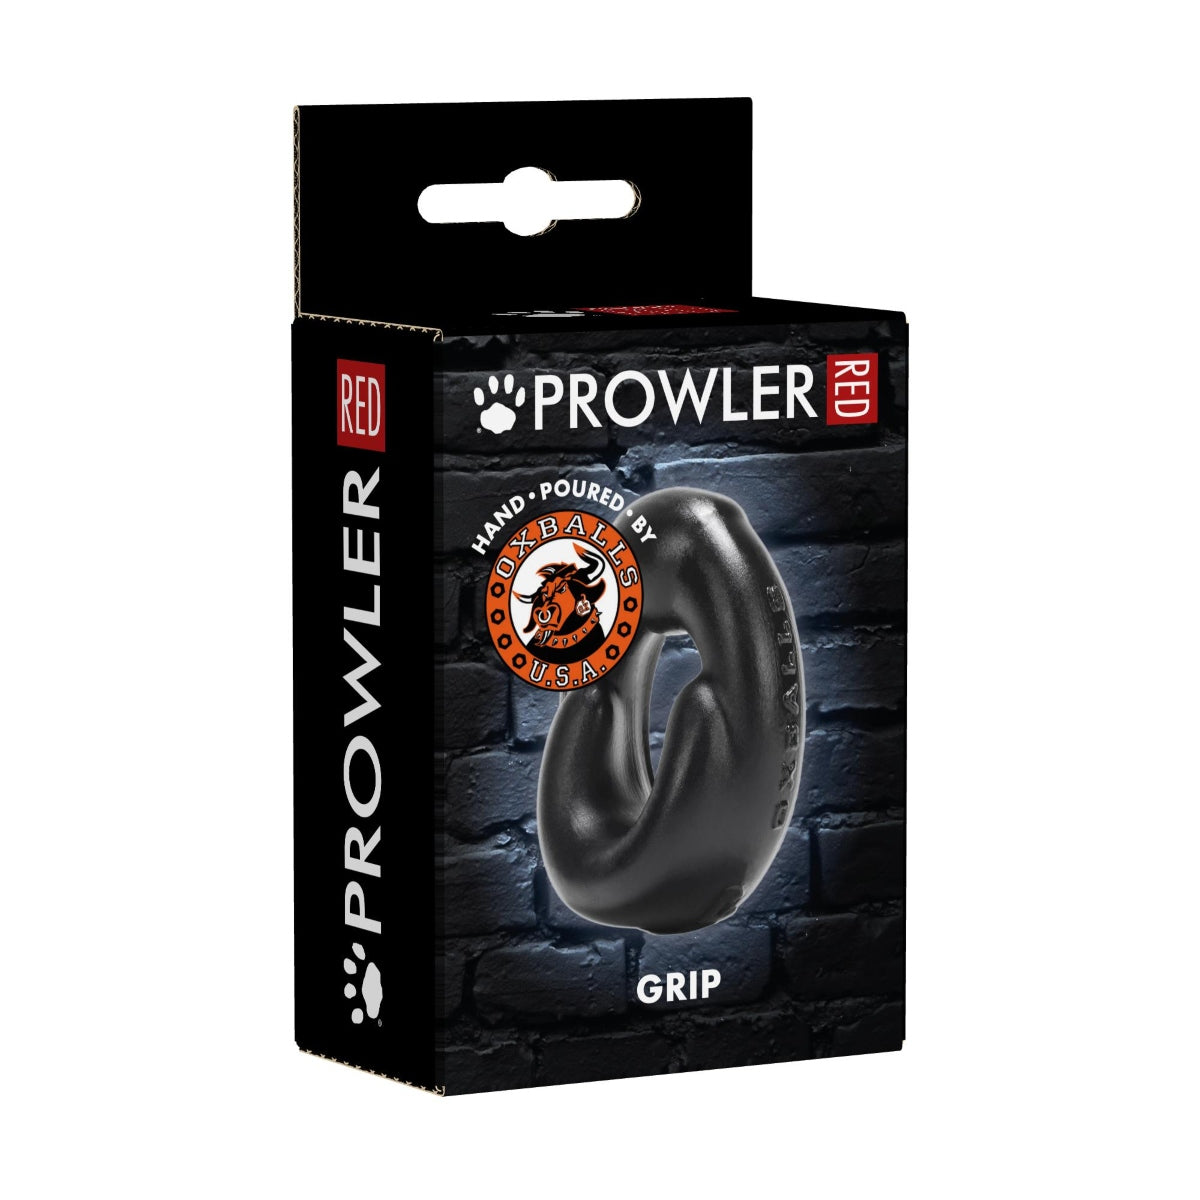 Prowler RED GRIP by Oxballs Black (8070254919919)